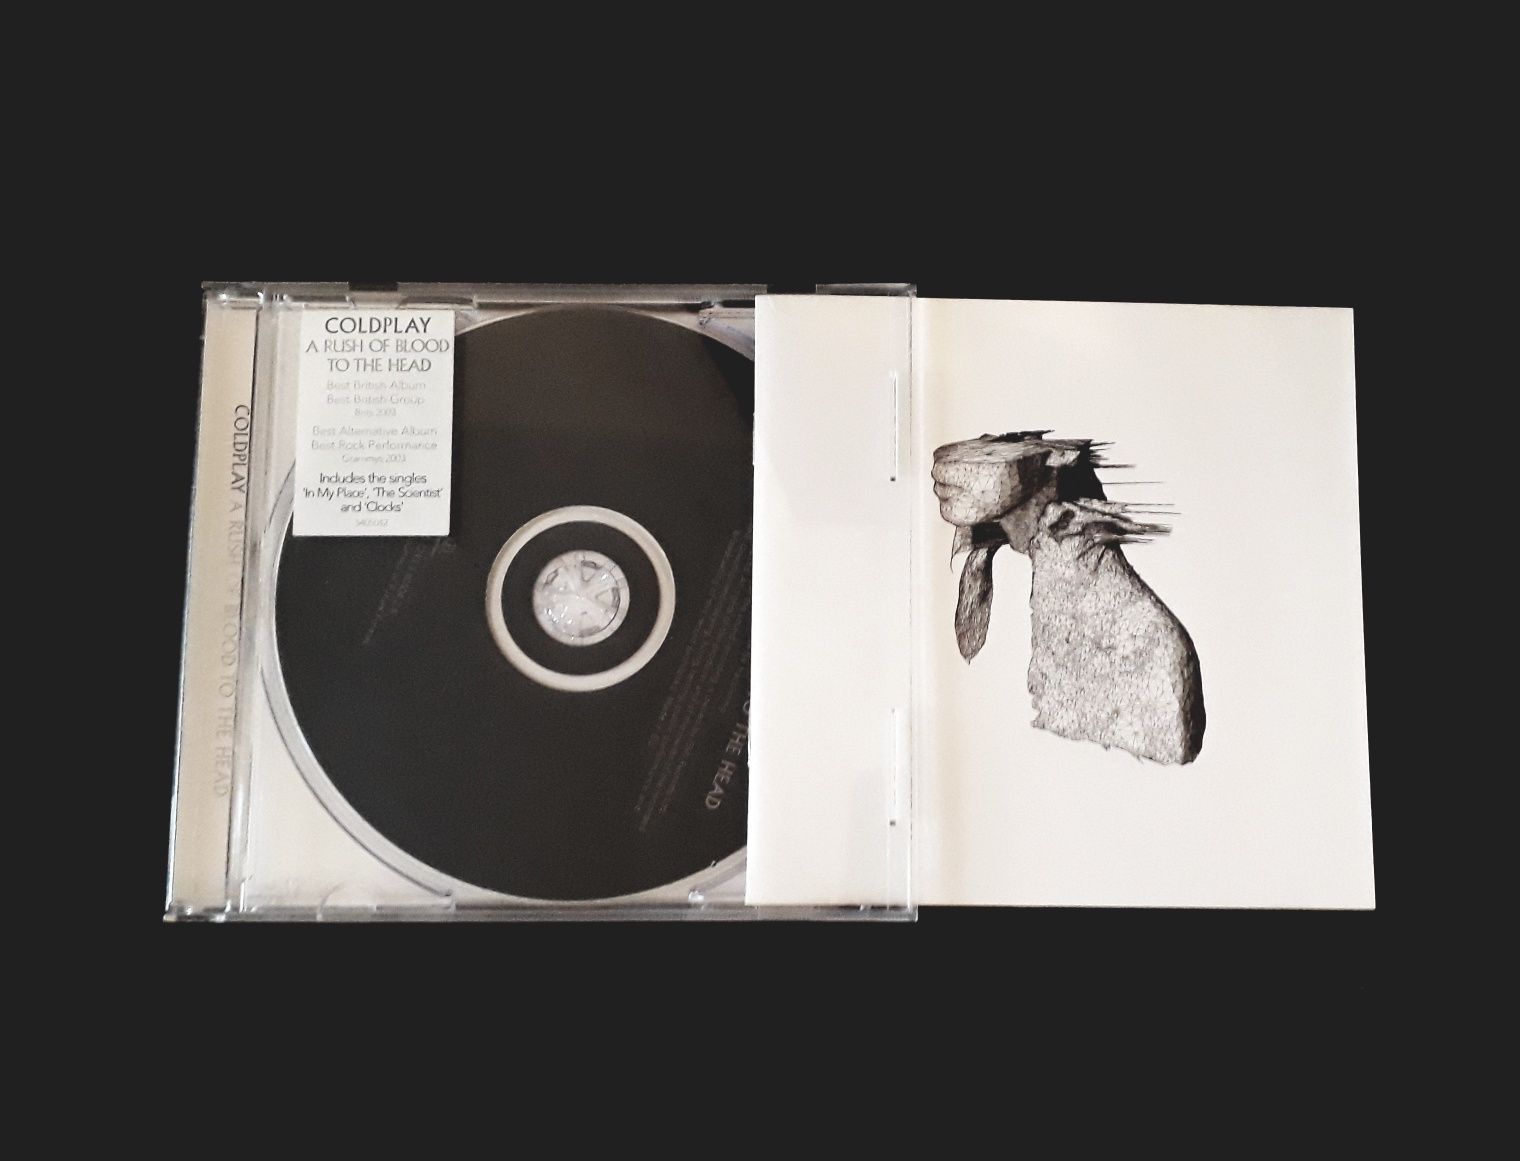 Coldplay ,,a rushof blood to the head,, CD